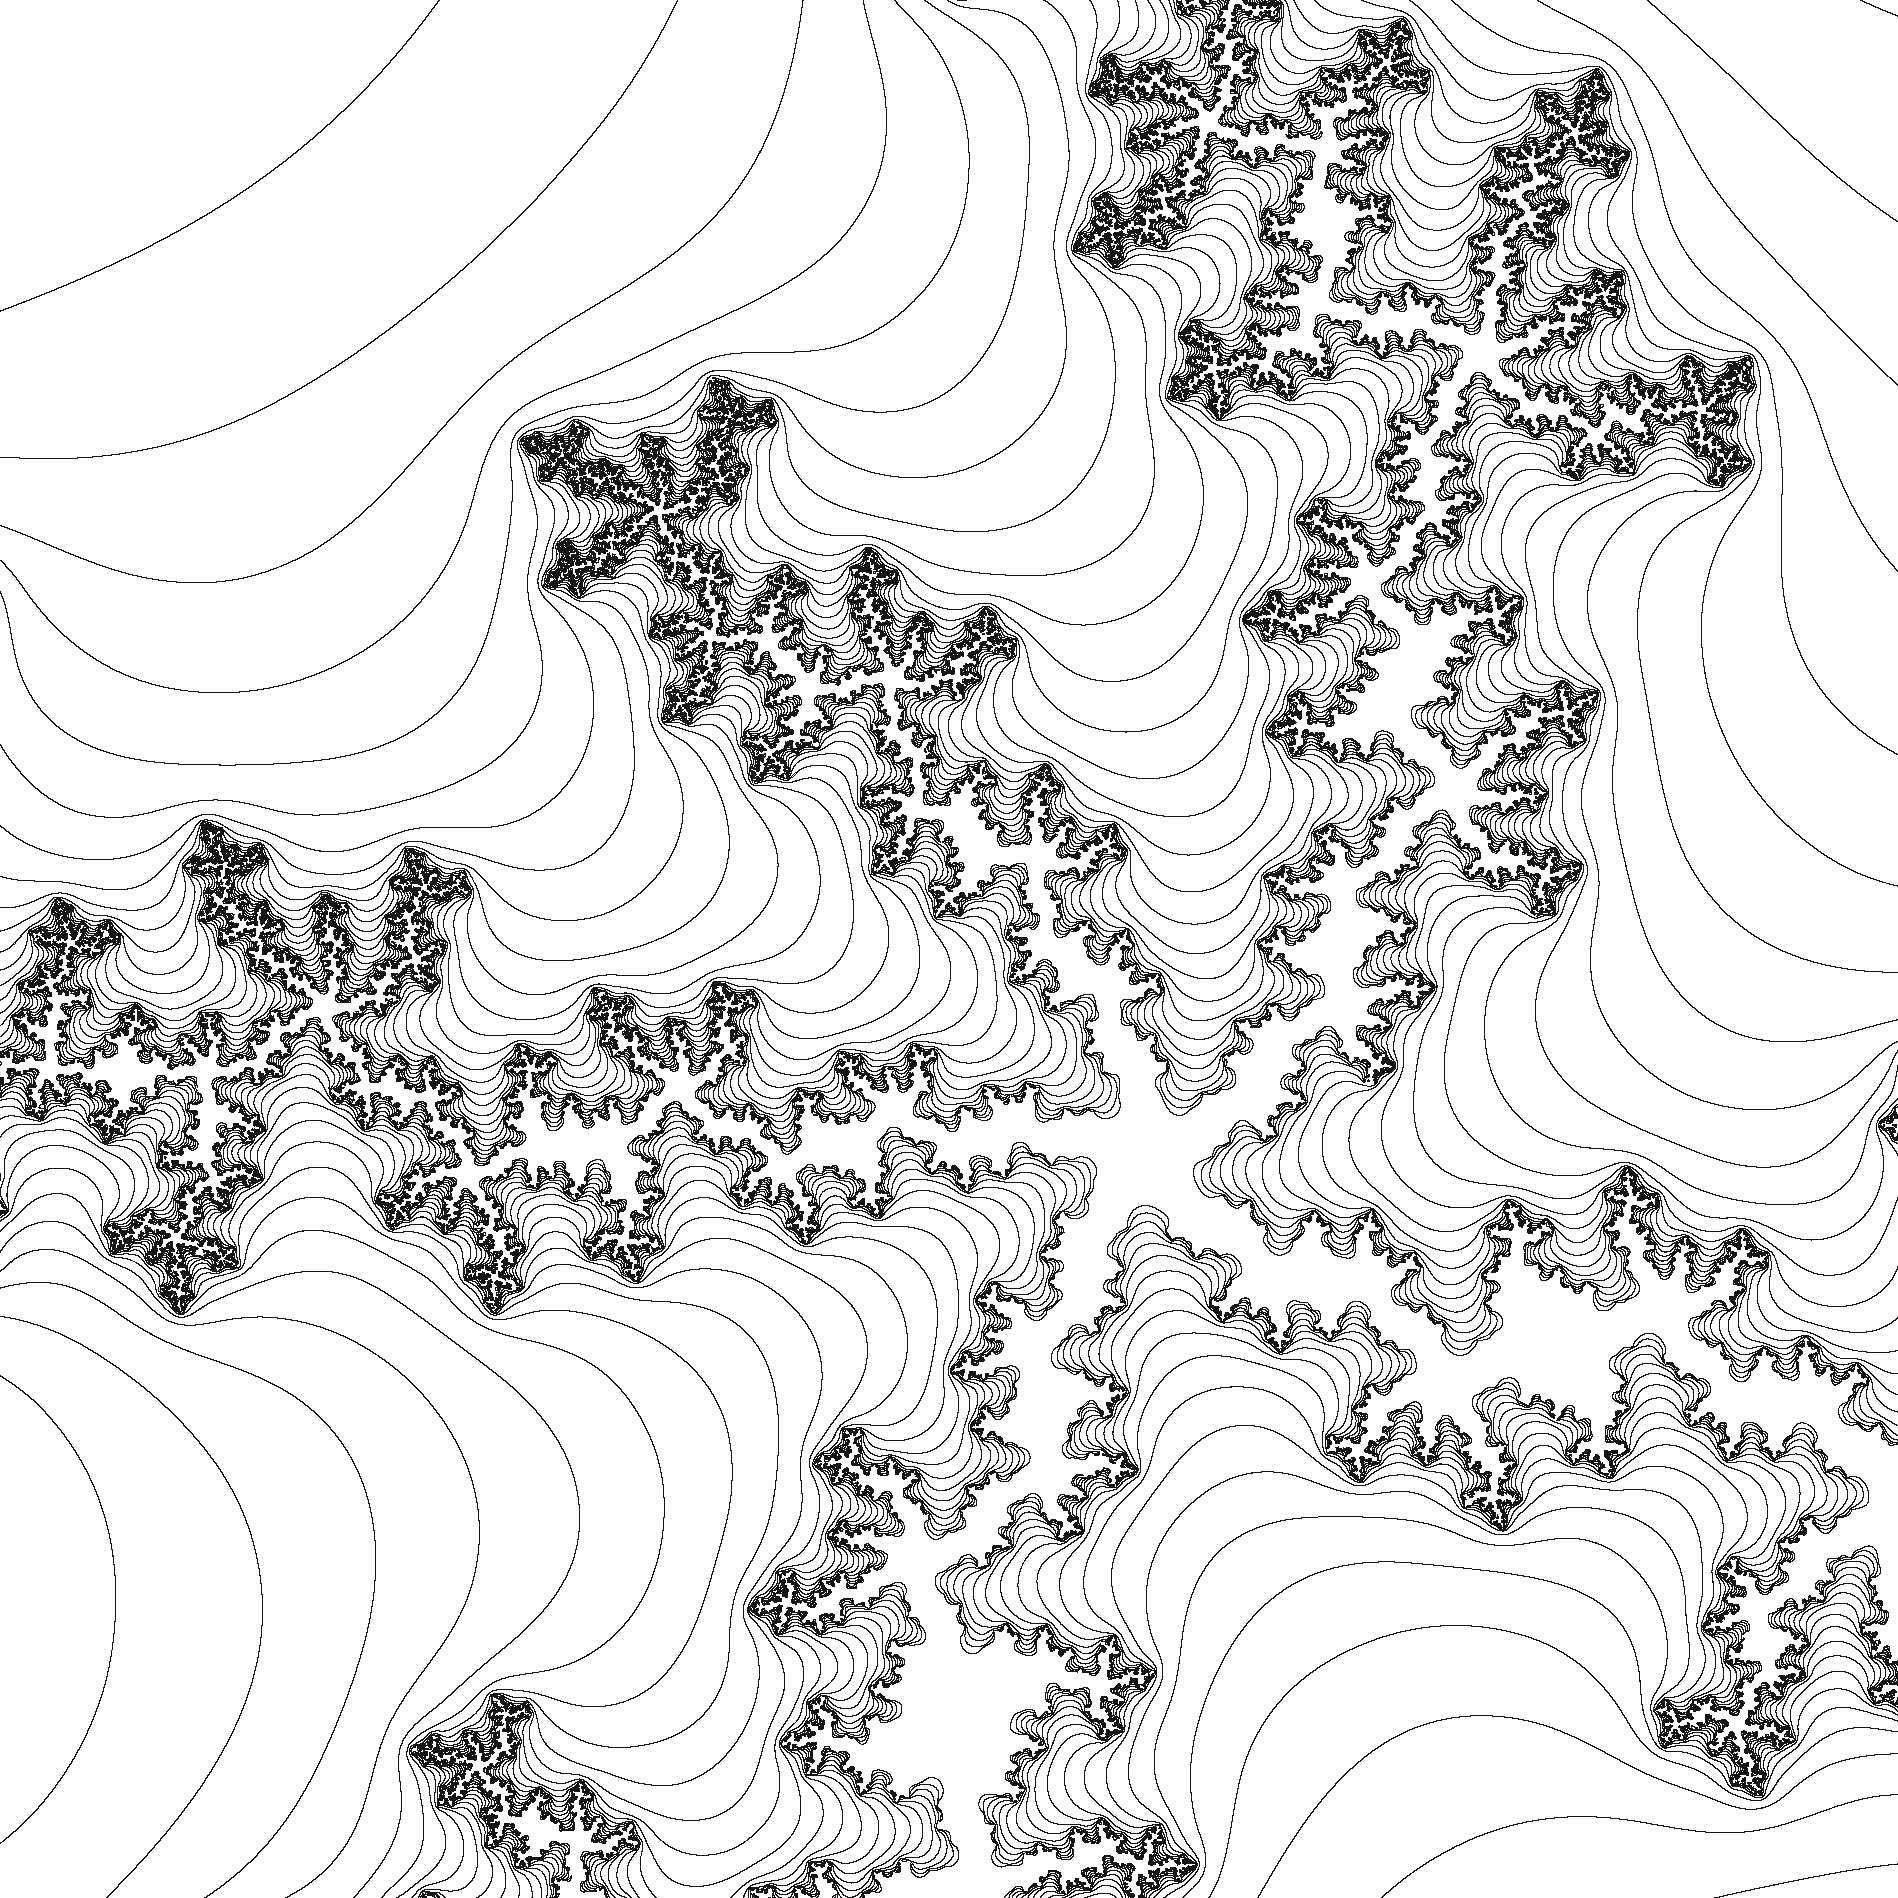 A detail of the Mandelbrot set, a fractal named after Benoit Mandelbrot, the French mathematician who investigated it in the 1970s. If you were to zoom in at any point on the intricate, wiggly line, the elaborate pattern would reappear infinitely. Art copyright © Edmund Harriss